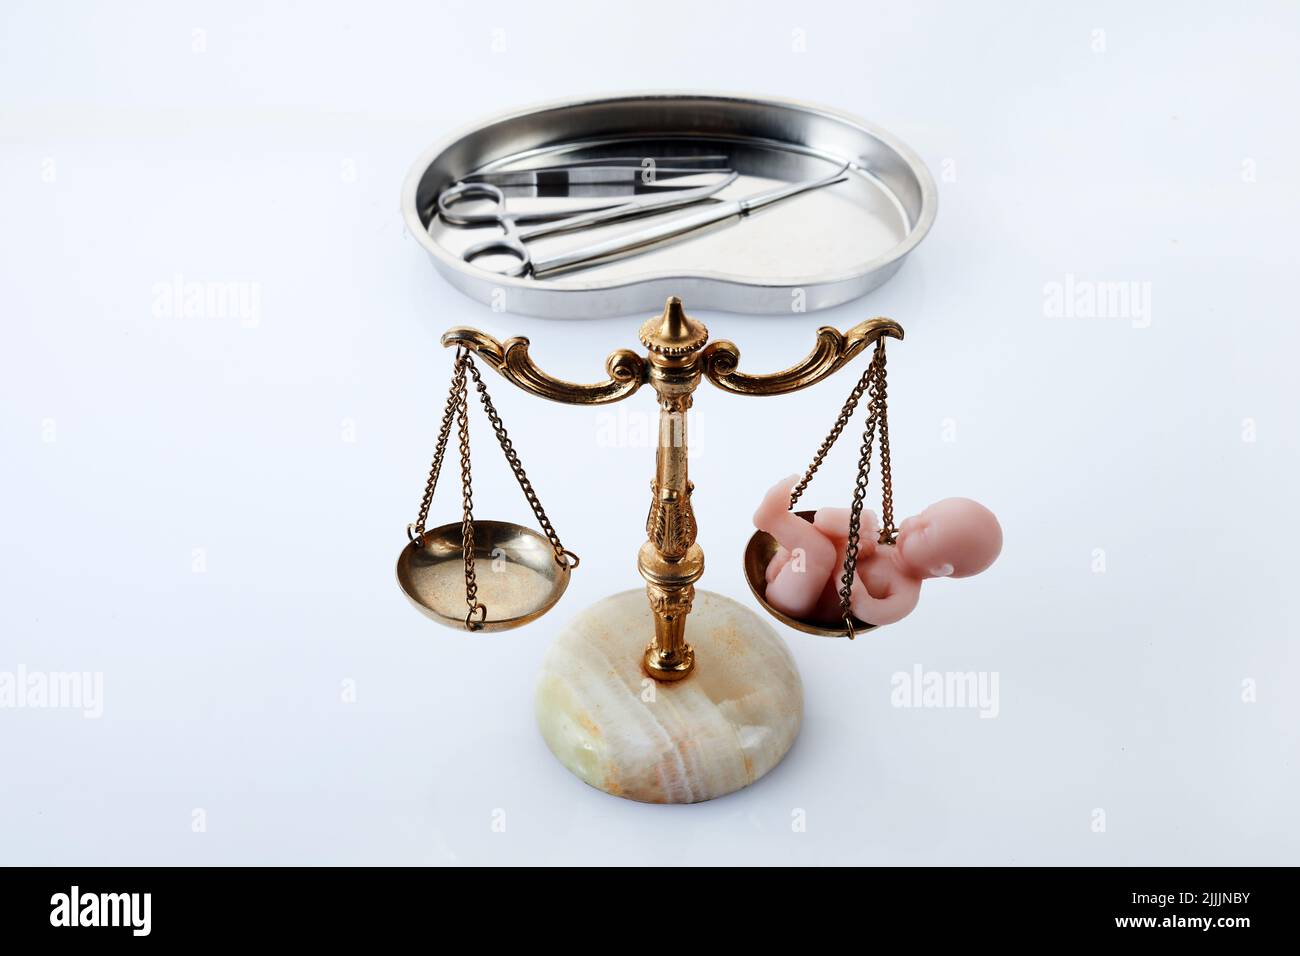 Reproduction laws and abortion or fetus rights Stock Photo